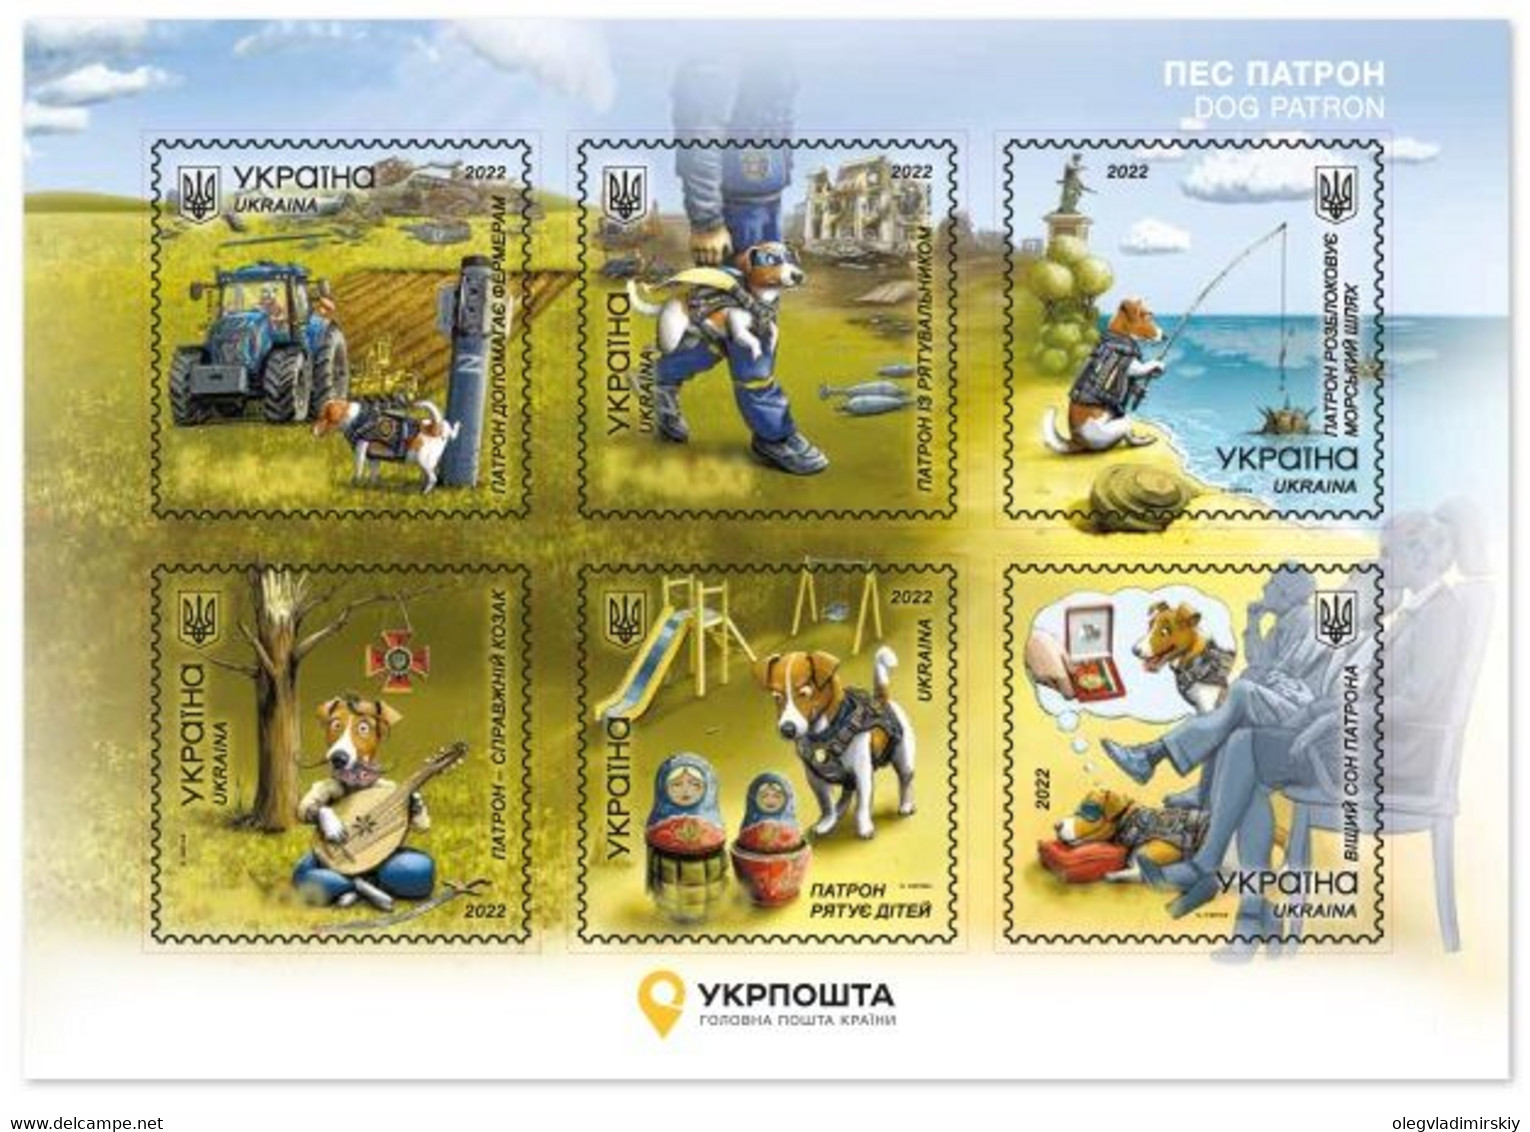 Ukraine 2022 The Famous Sapper Dog Patron - Army Assistant Postal Charity Issue Set Of 6 Non-postage Stamps In A Block - Poppen